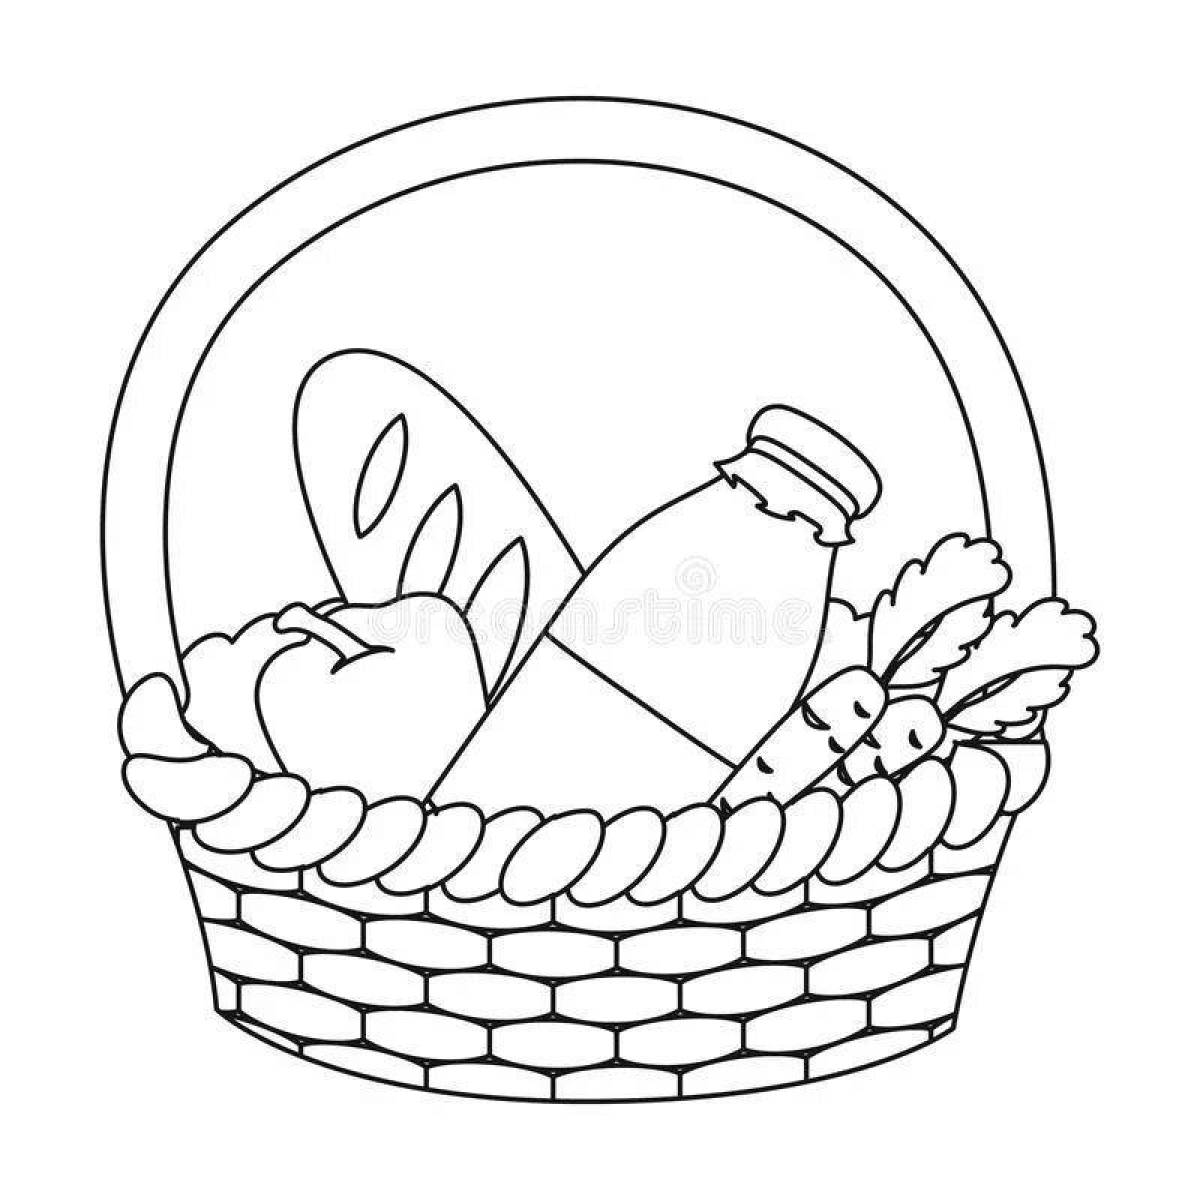 Coloring basket with sweet products